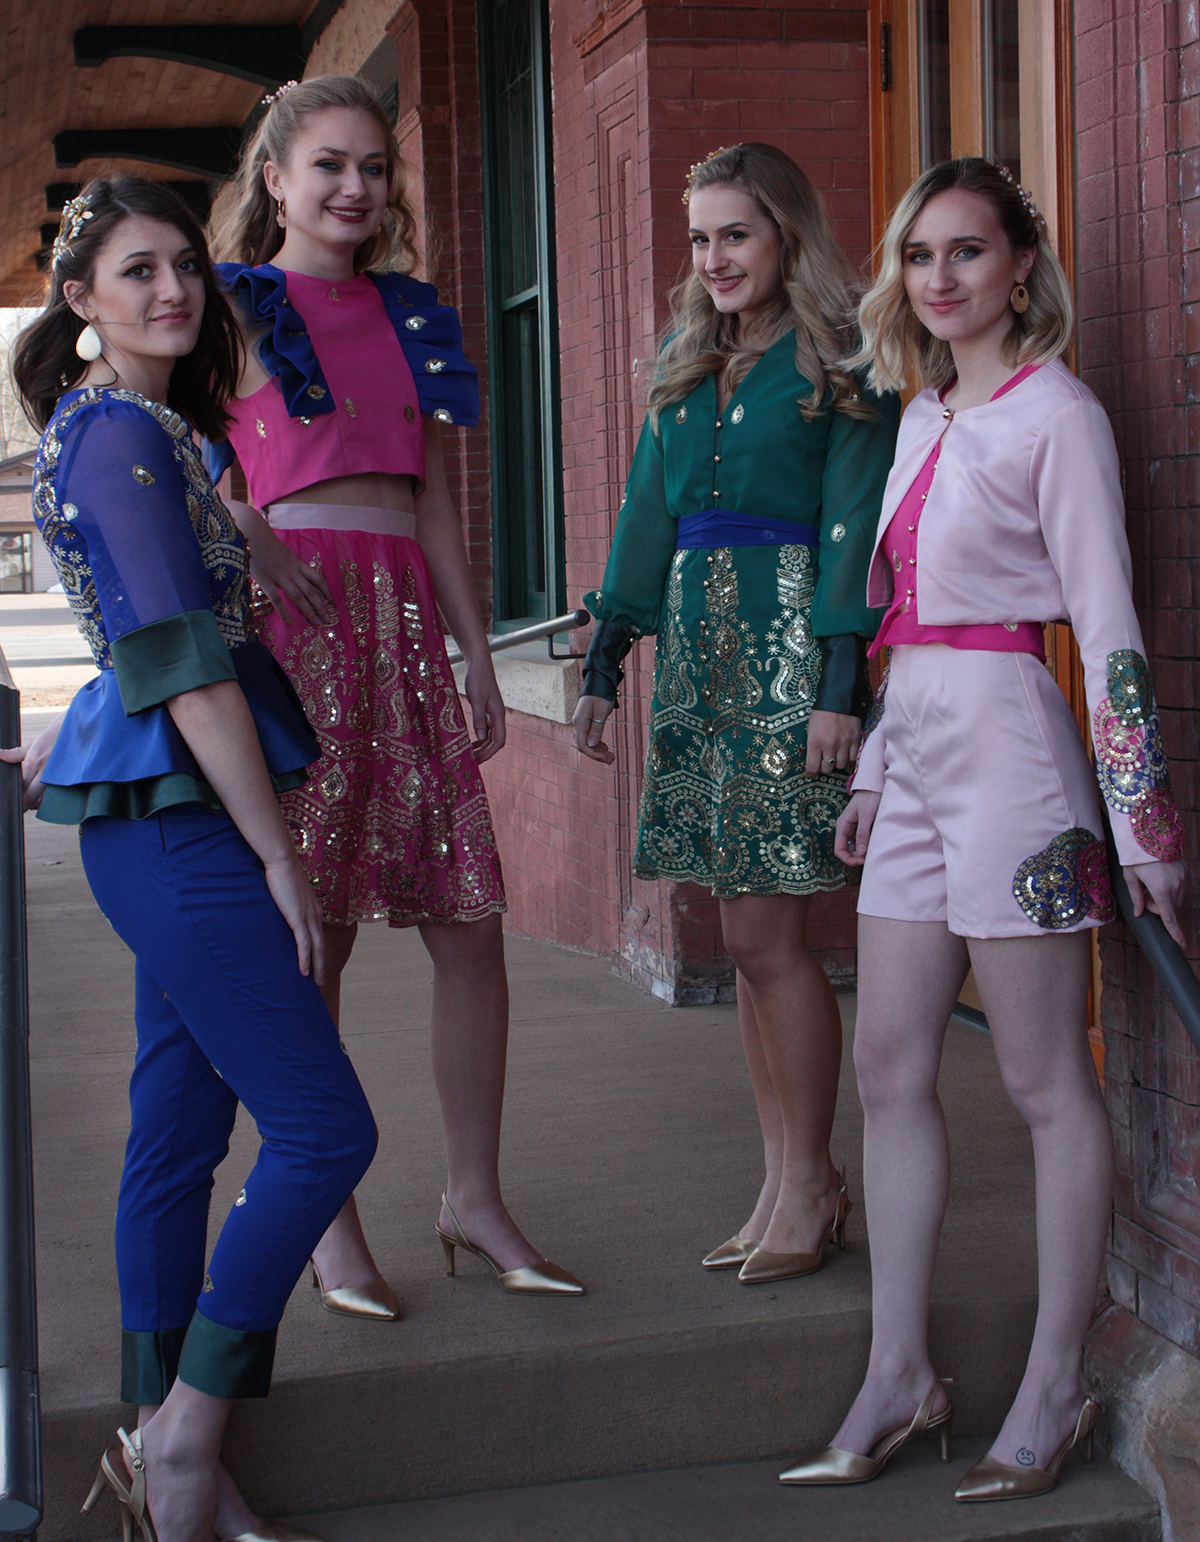 Fatimah Alfayruz’s collection entitled “Zahi” is made from fabrics from her hometown Al-Qatif. The models are Mikayla Larsen, at left, Anna Schmidtke, Grace Pecha and Violet Nelson.